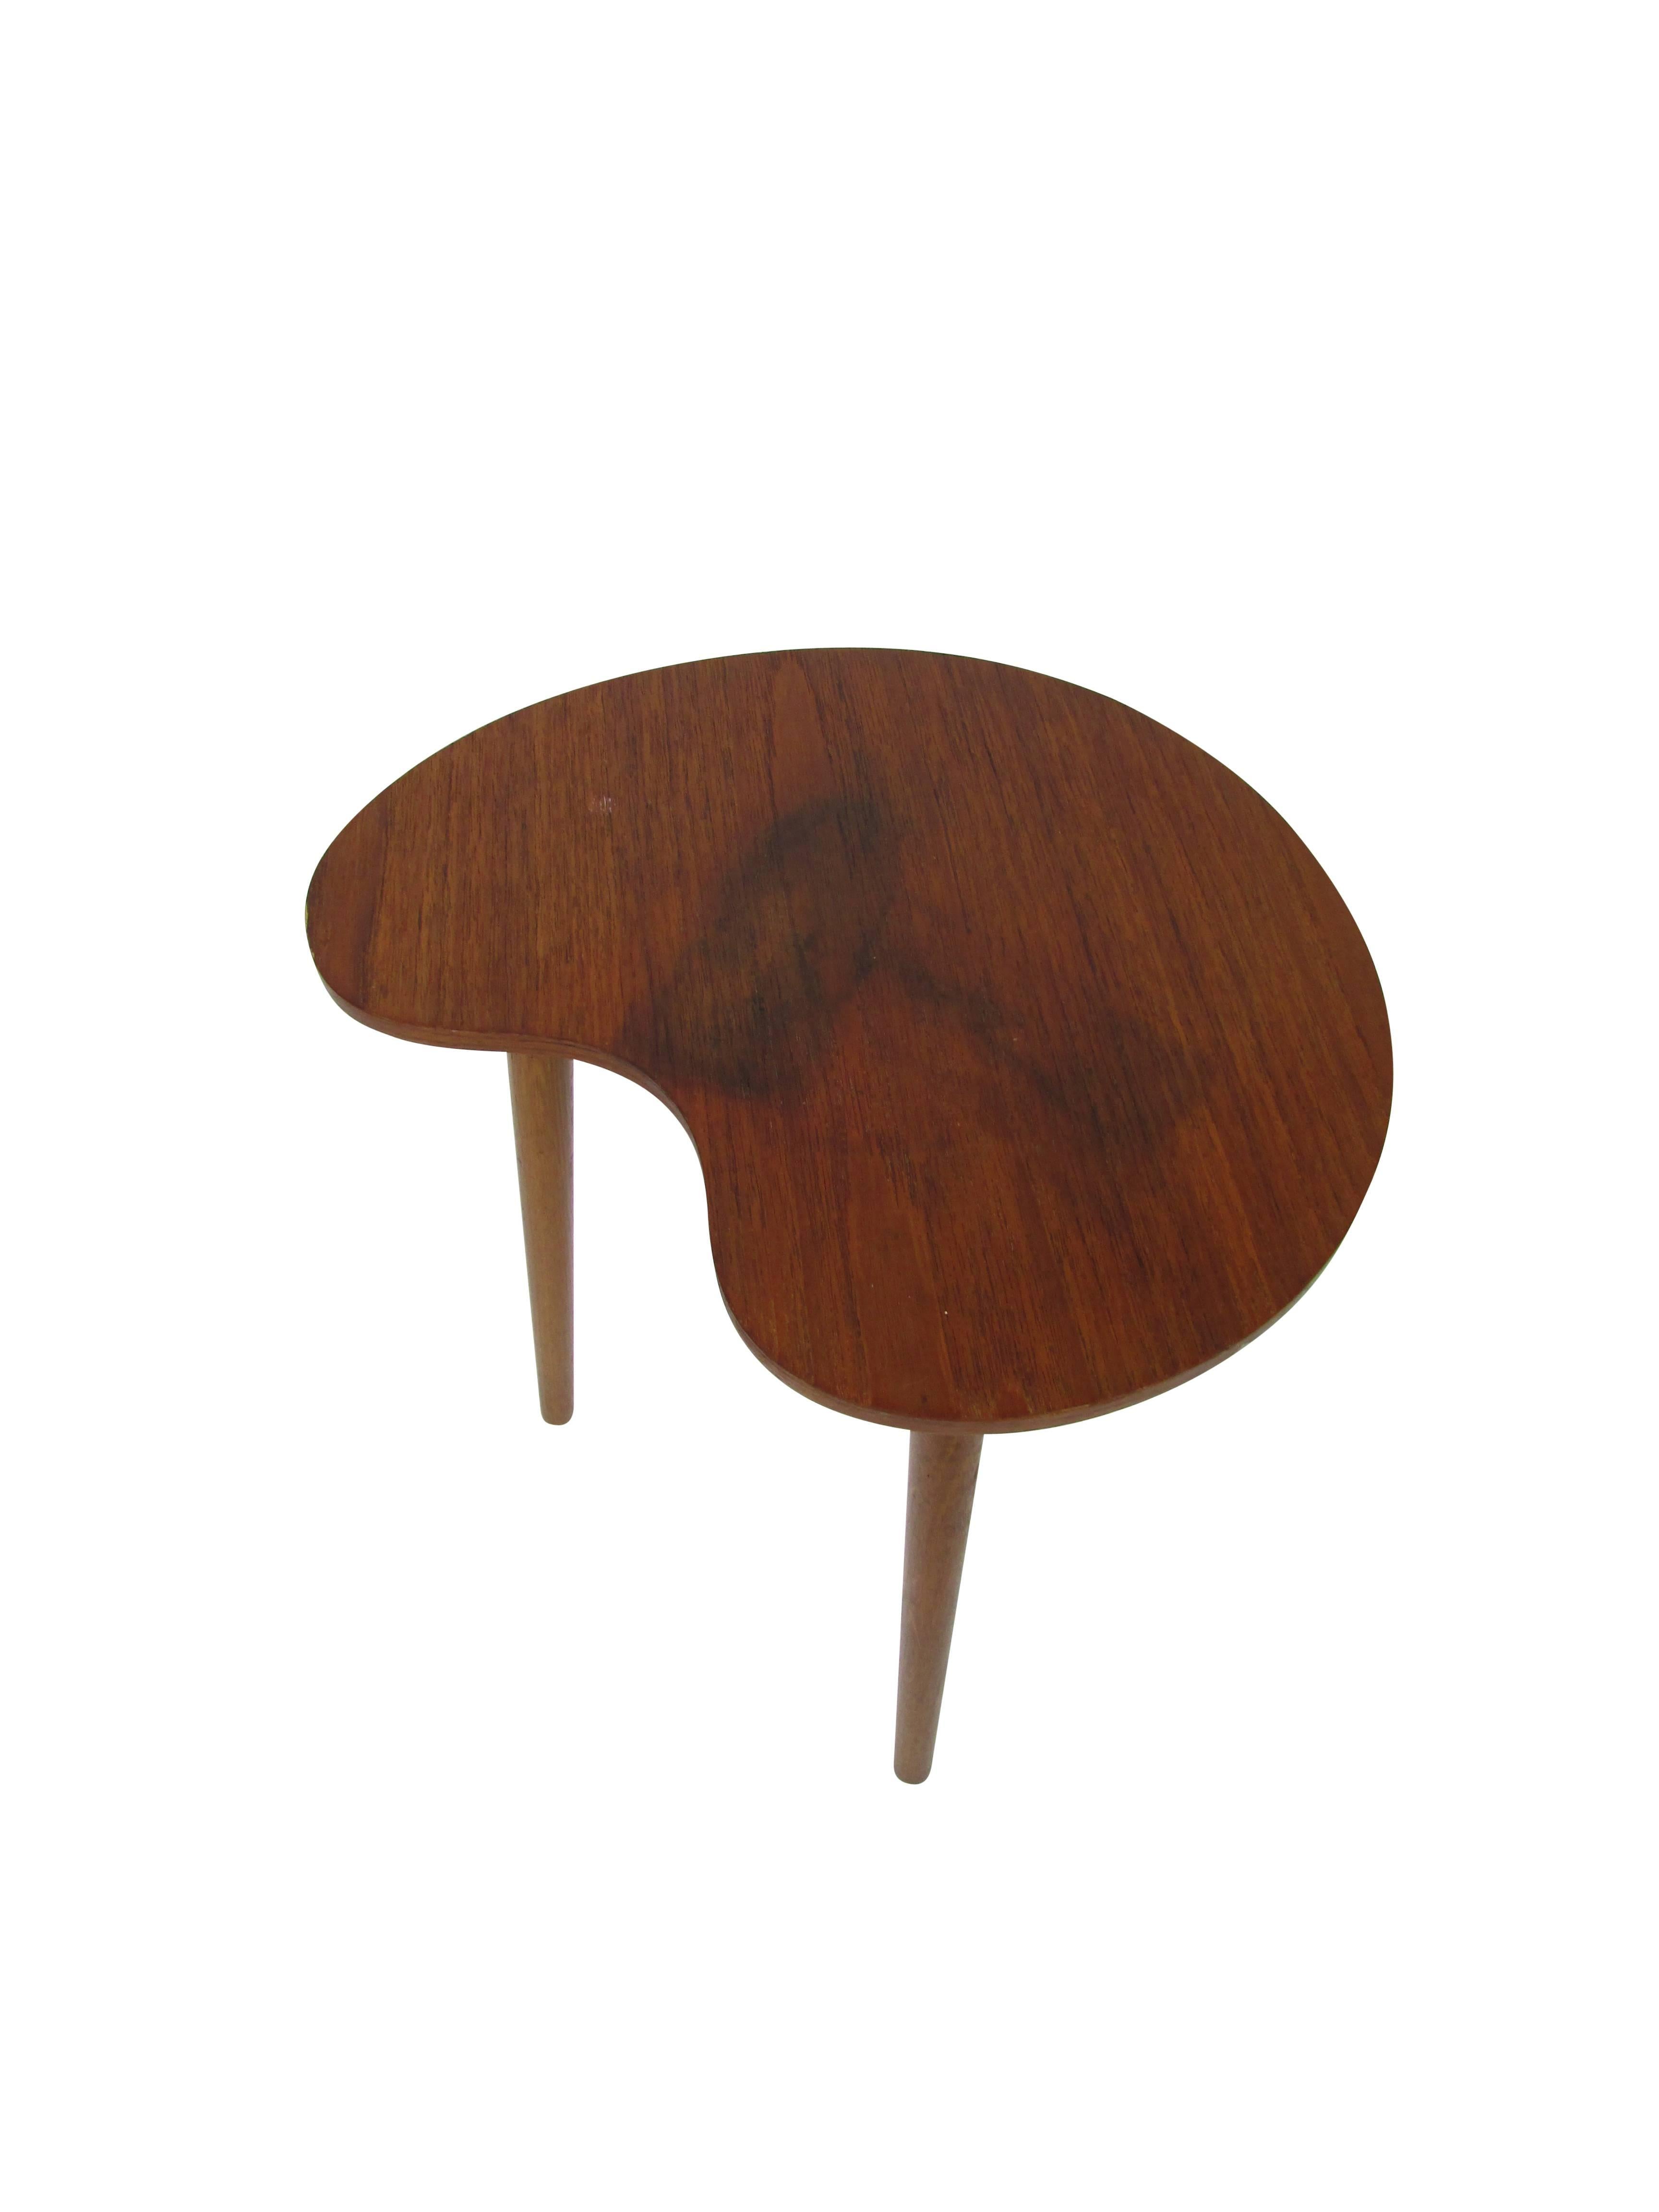 This is a vintage Danish palette shaped side table with hidden ashtray by L. Chr. Larsen & Son, circa 1950.